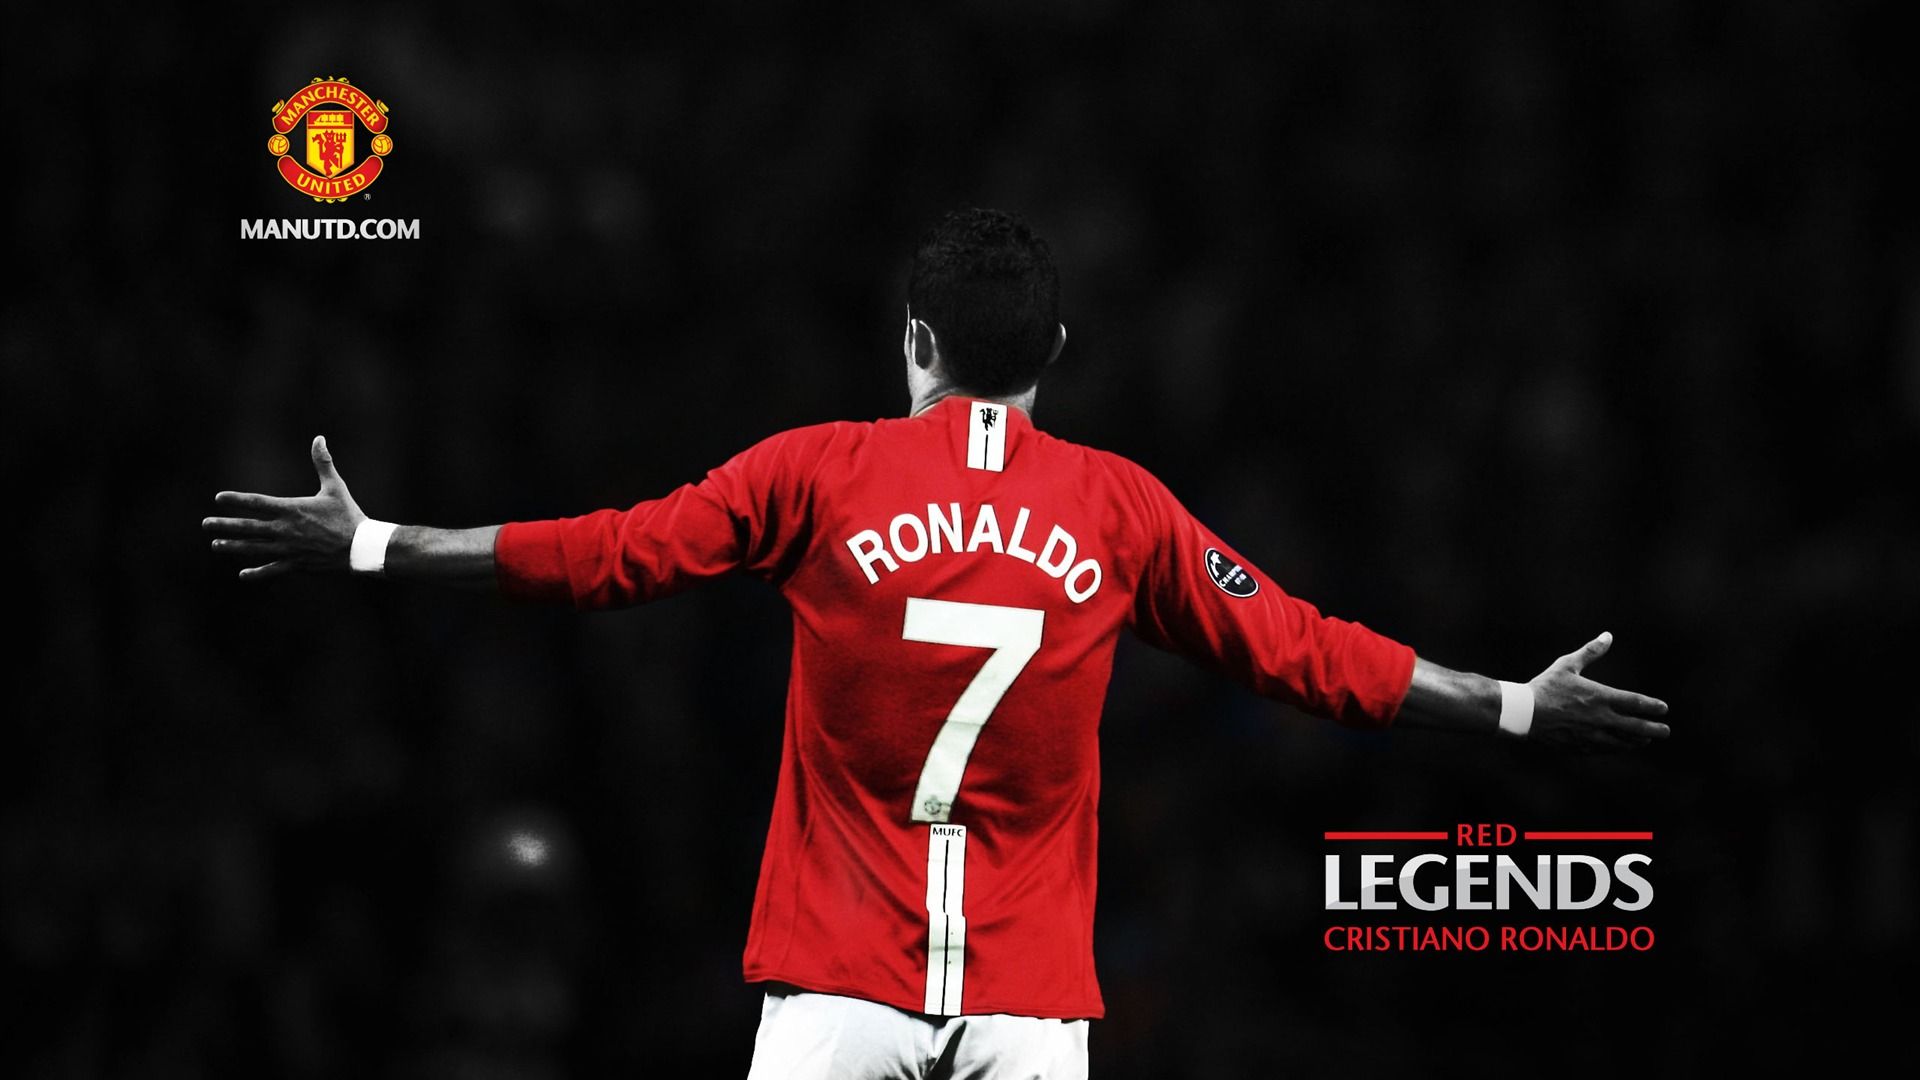 HD Quality Manchester United Wallpapers - SiWallpaper Tag: 1